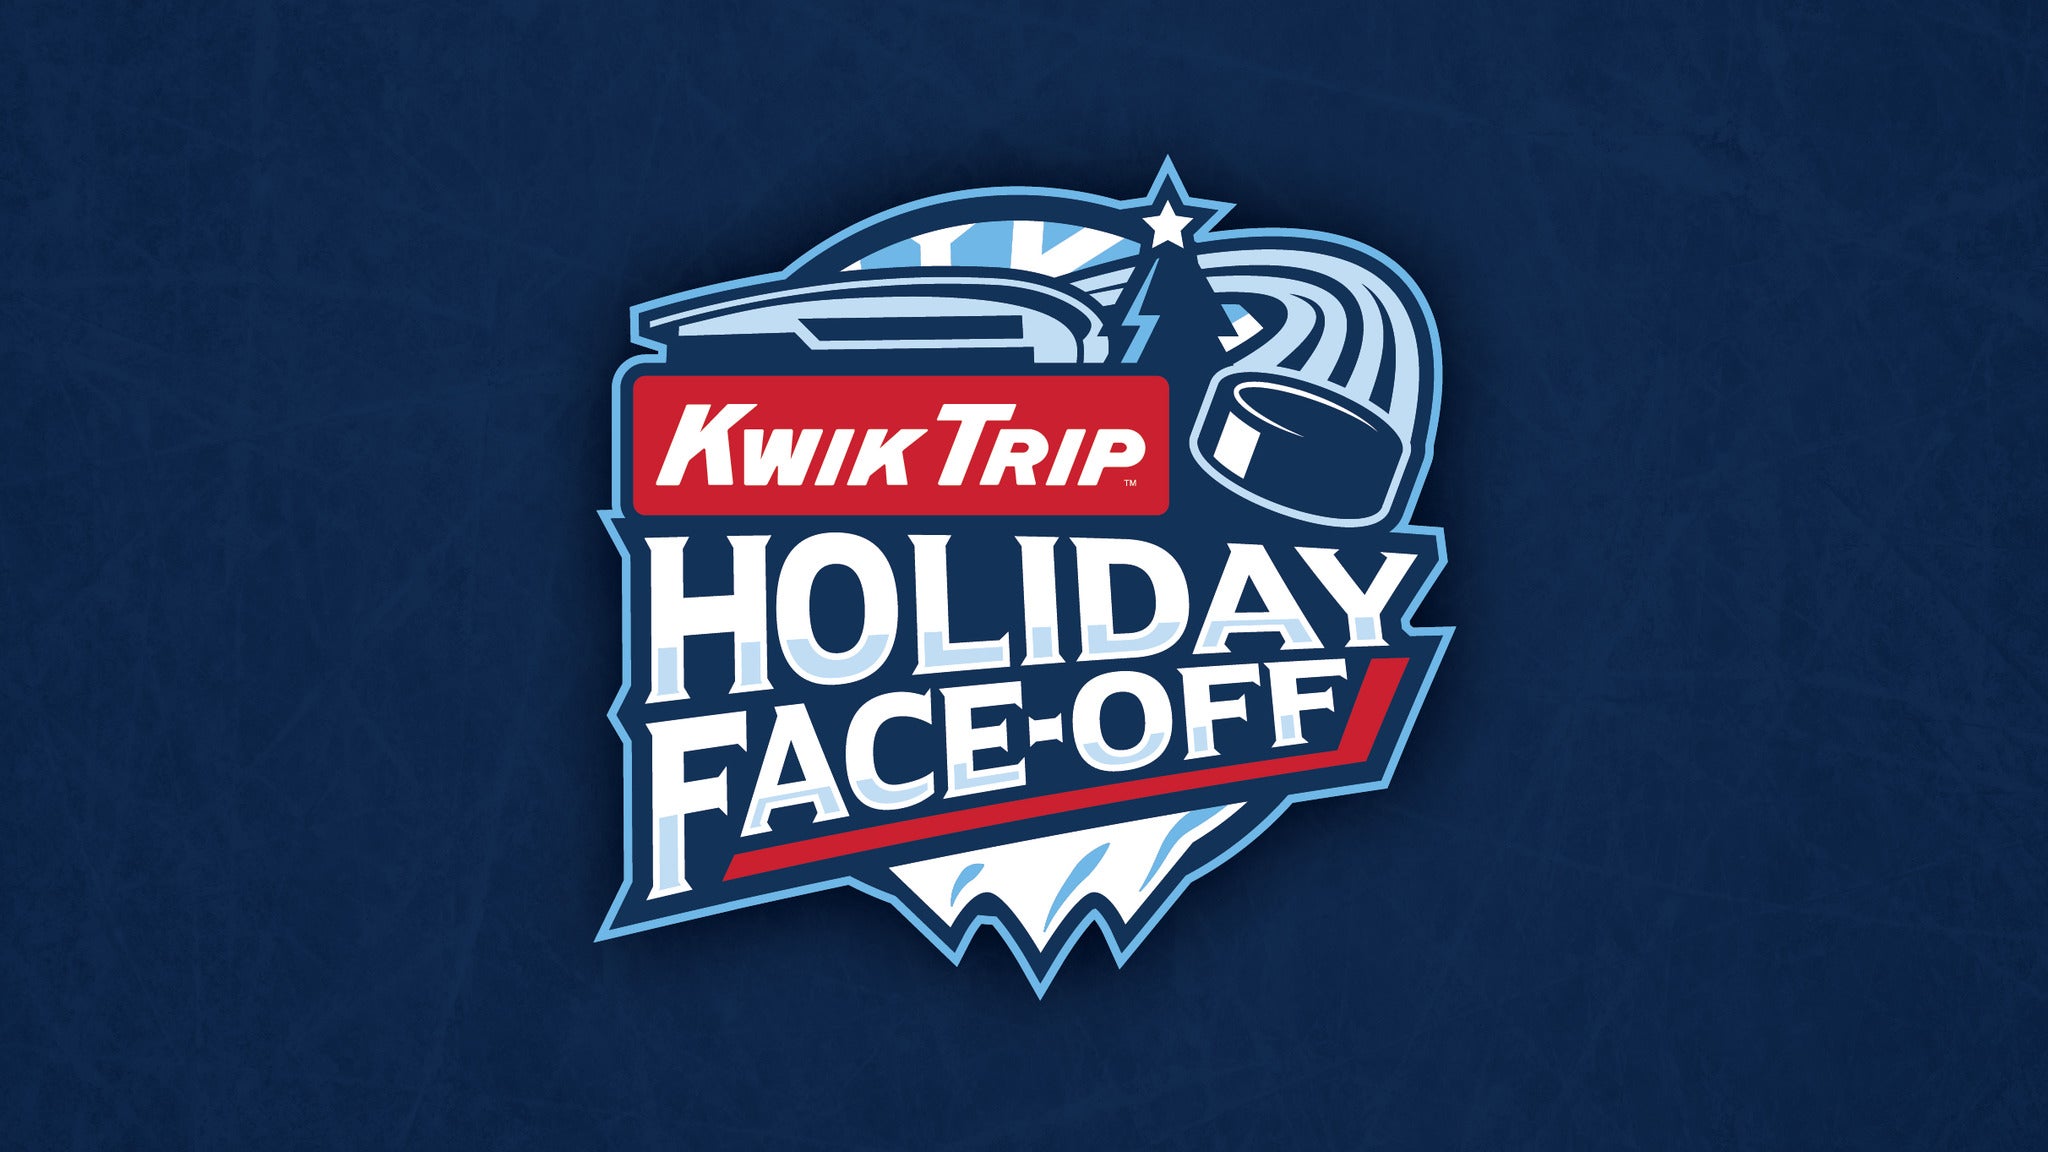 presale code for Kwik Trip Holiday Face-Off advanced tickets in Milwaukee at Fiserv Forum